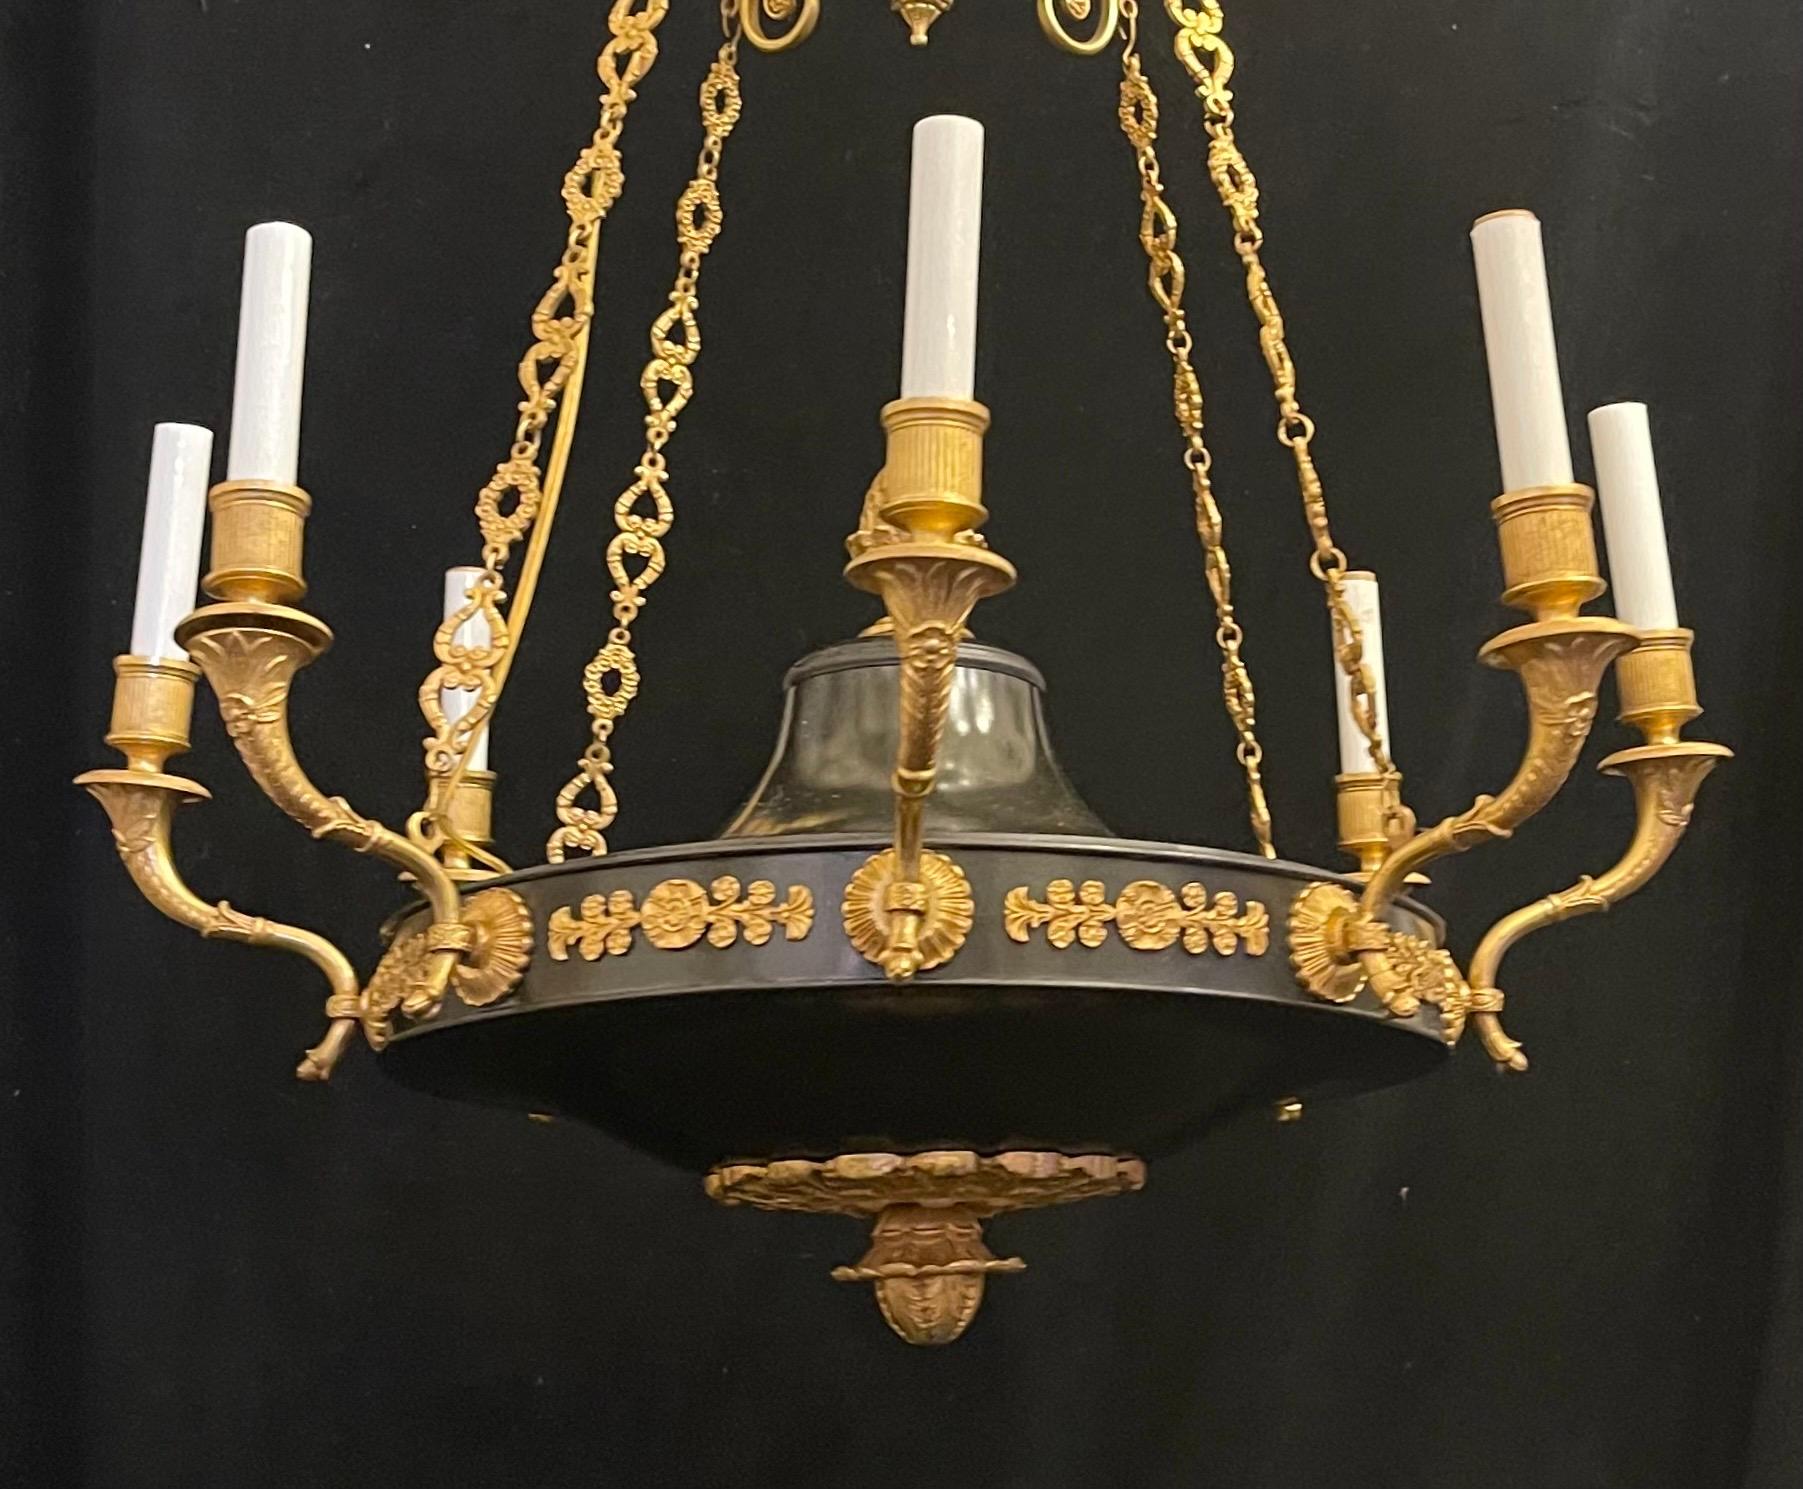 Wonderful French Empire Neoclassical Patinated Ormolu Bronze Chandelier Fixture In Good Condition For Sale In Roslyn, NY